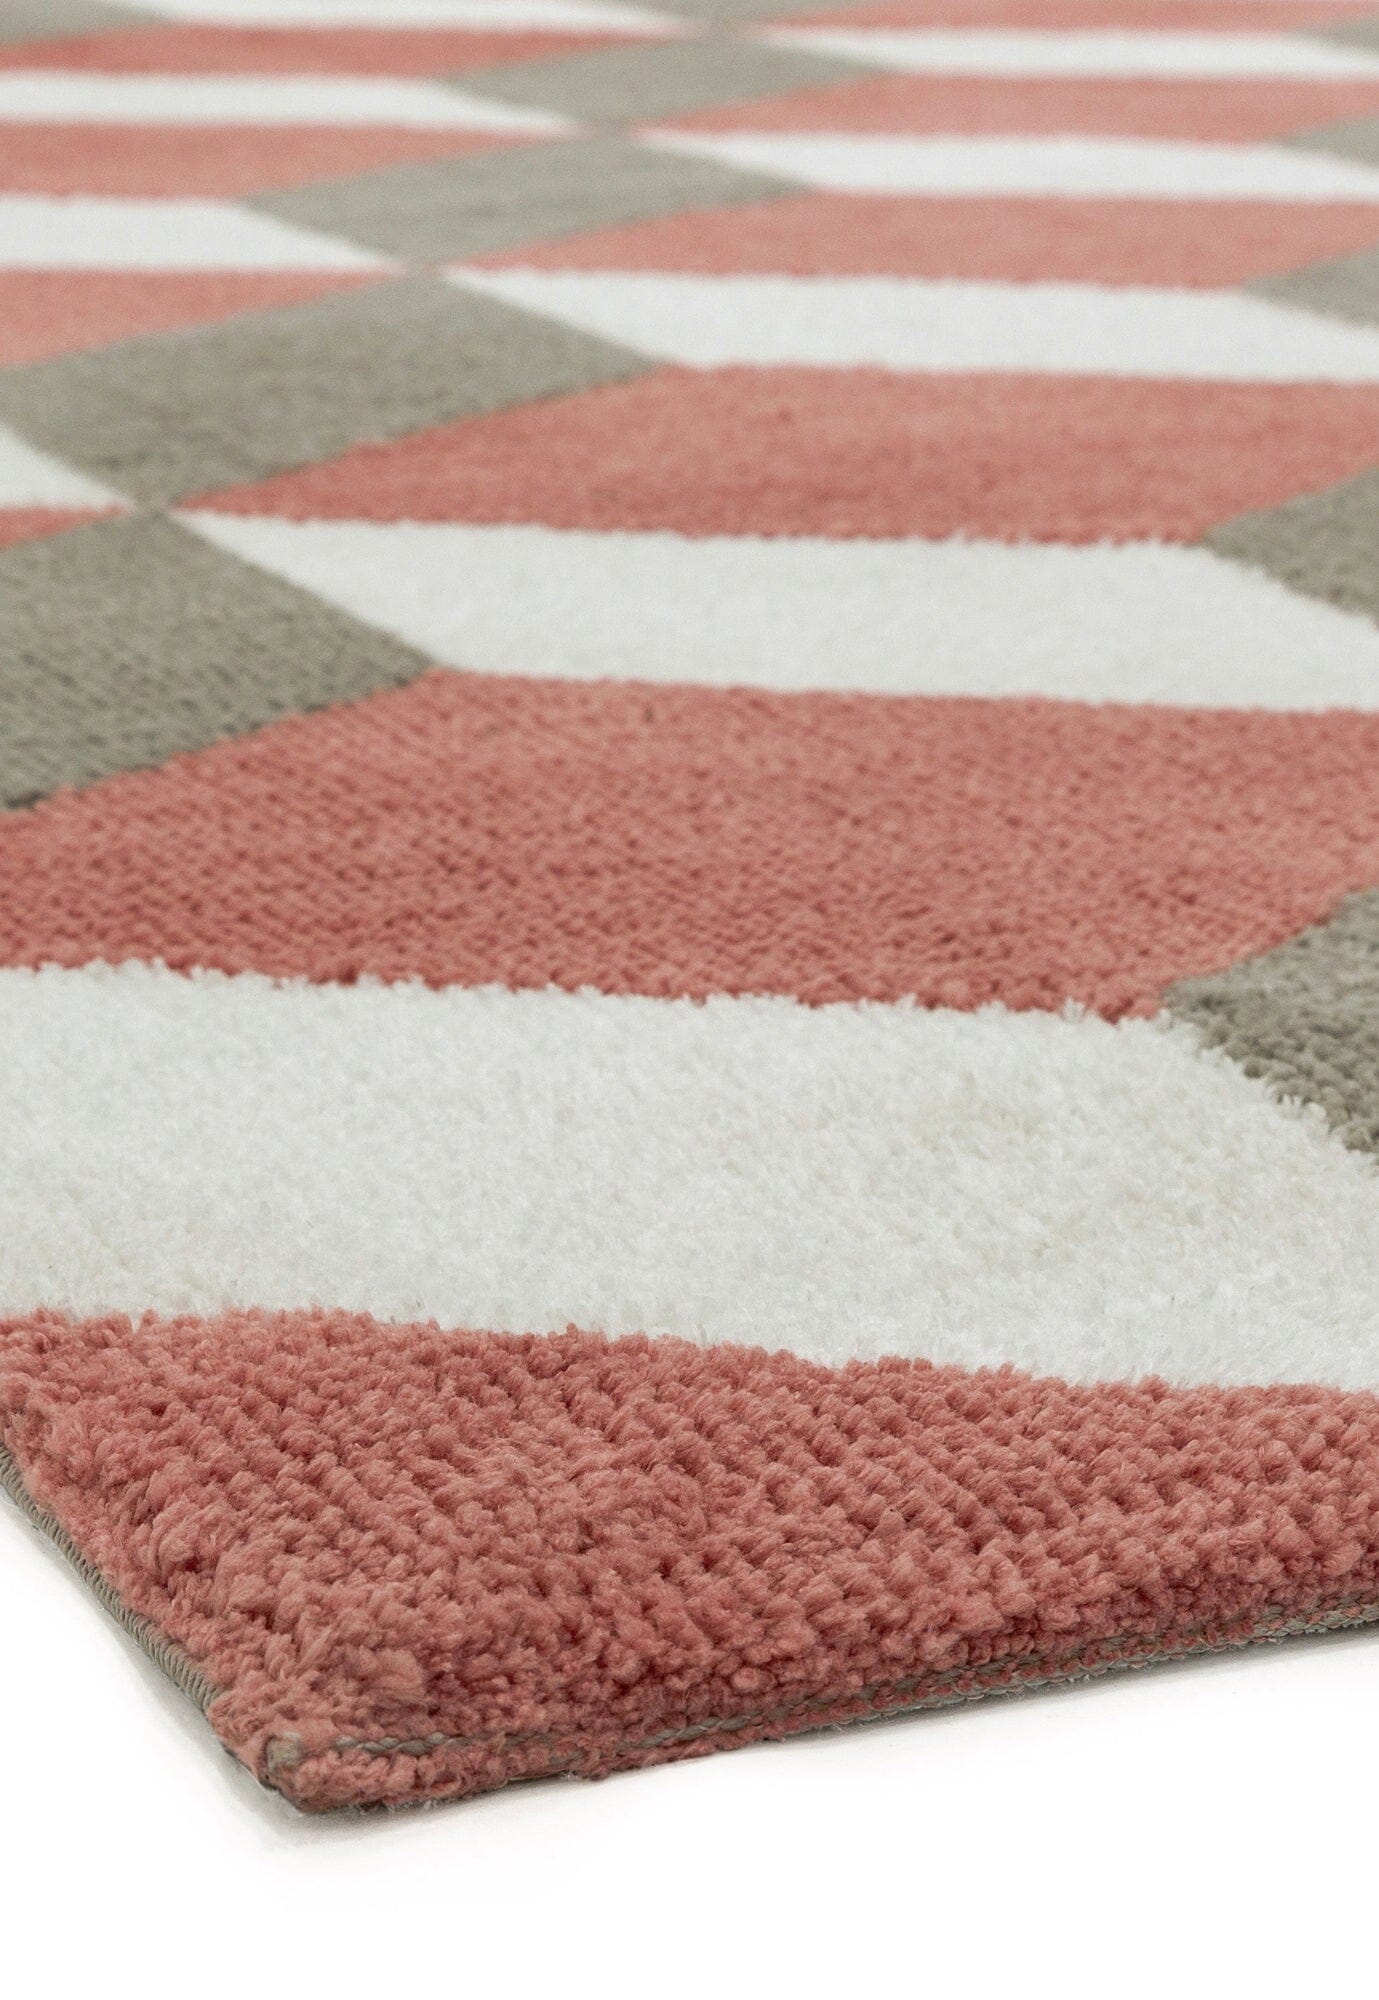 Asiatic Carpets Arlo Machine Knitted Rug Pink Block - 120 x 170cm